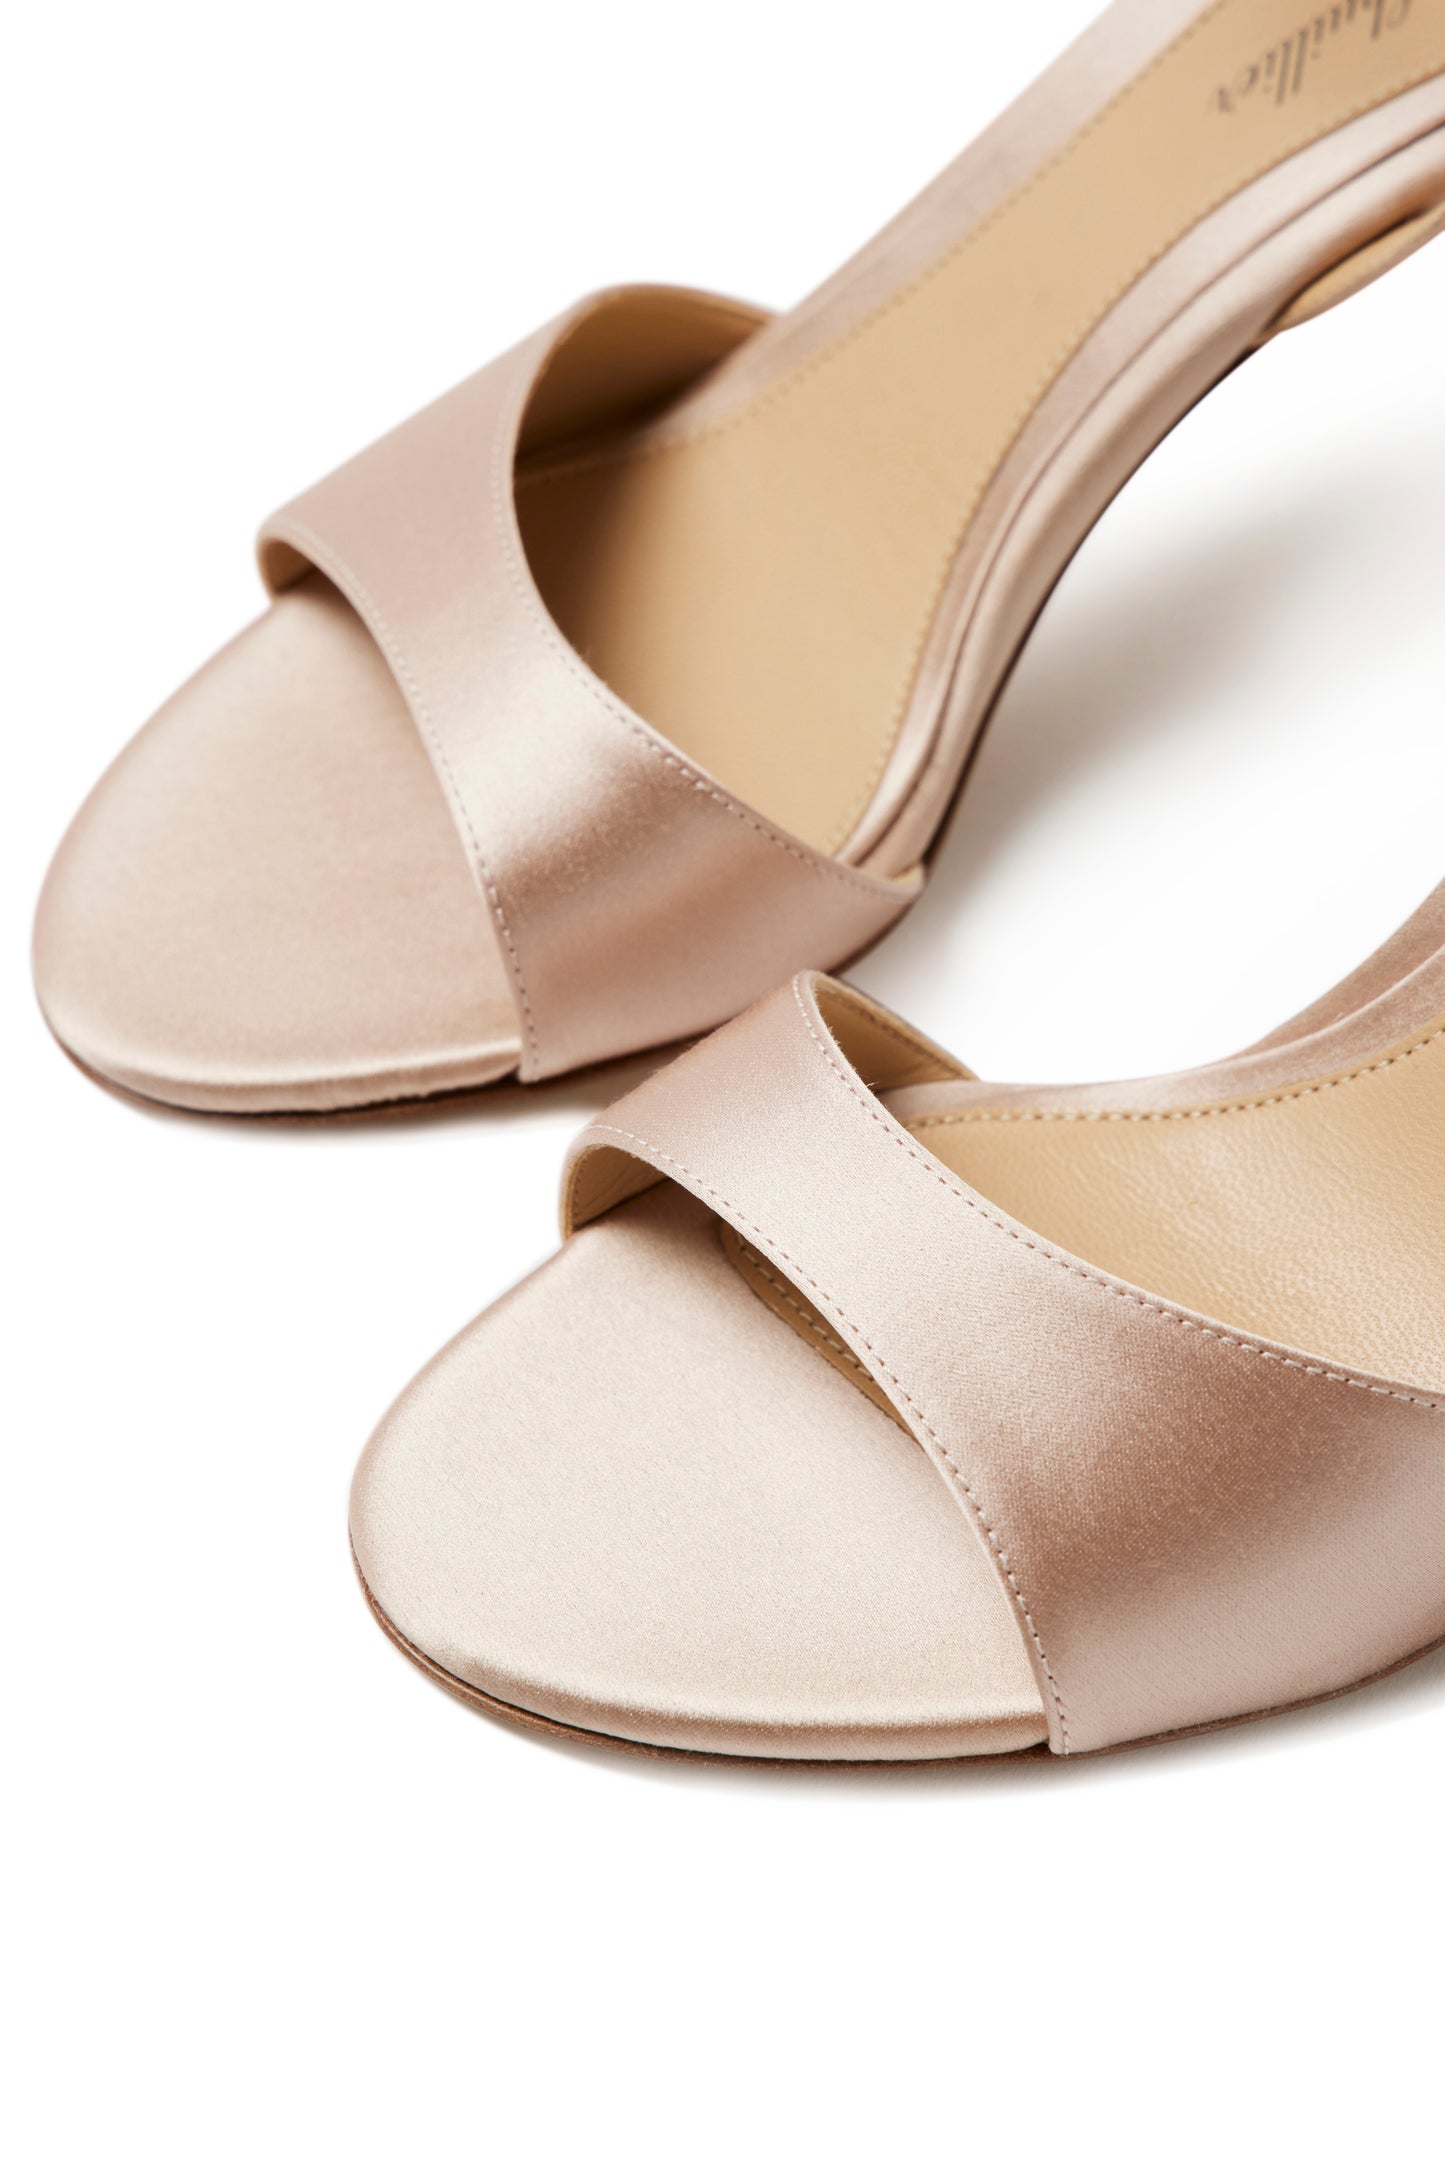 Blush satin sandal with adjustable ankle strap and 80mm ombre lucite heel.